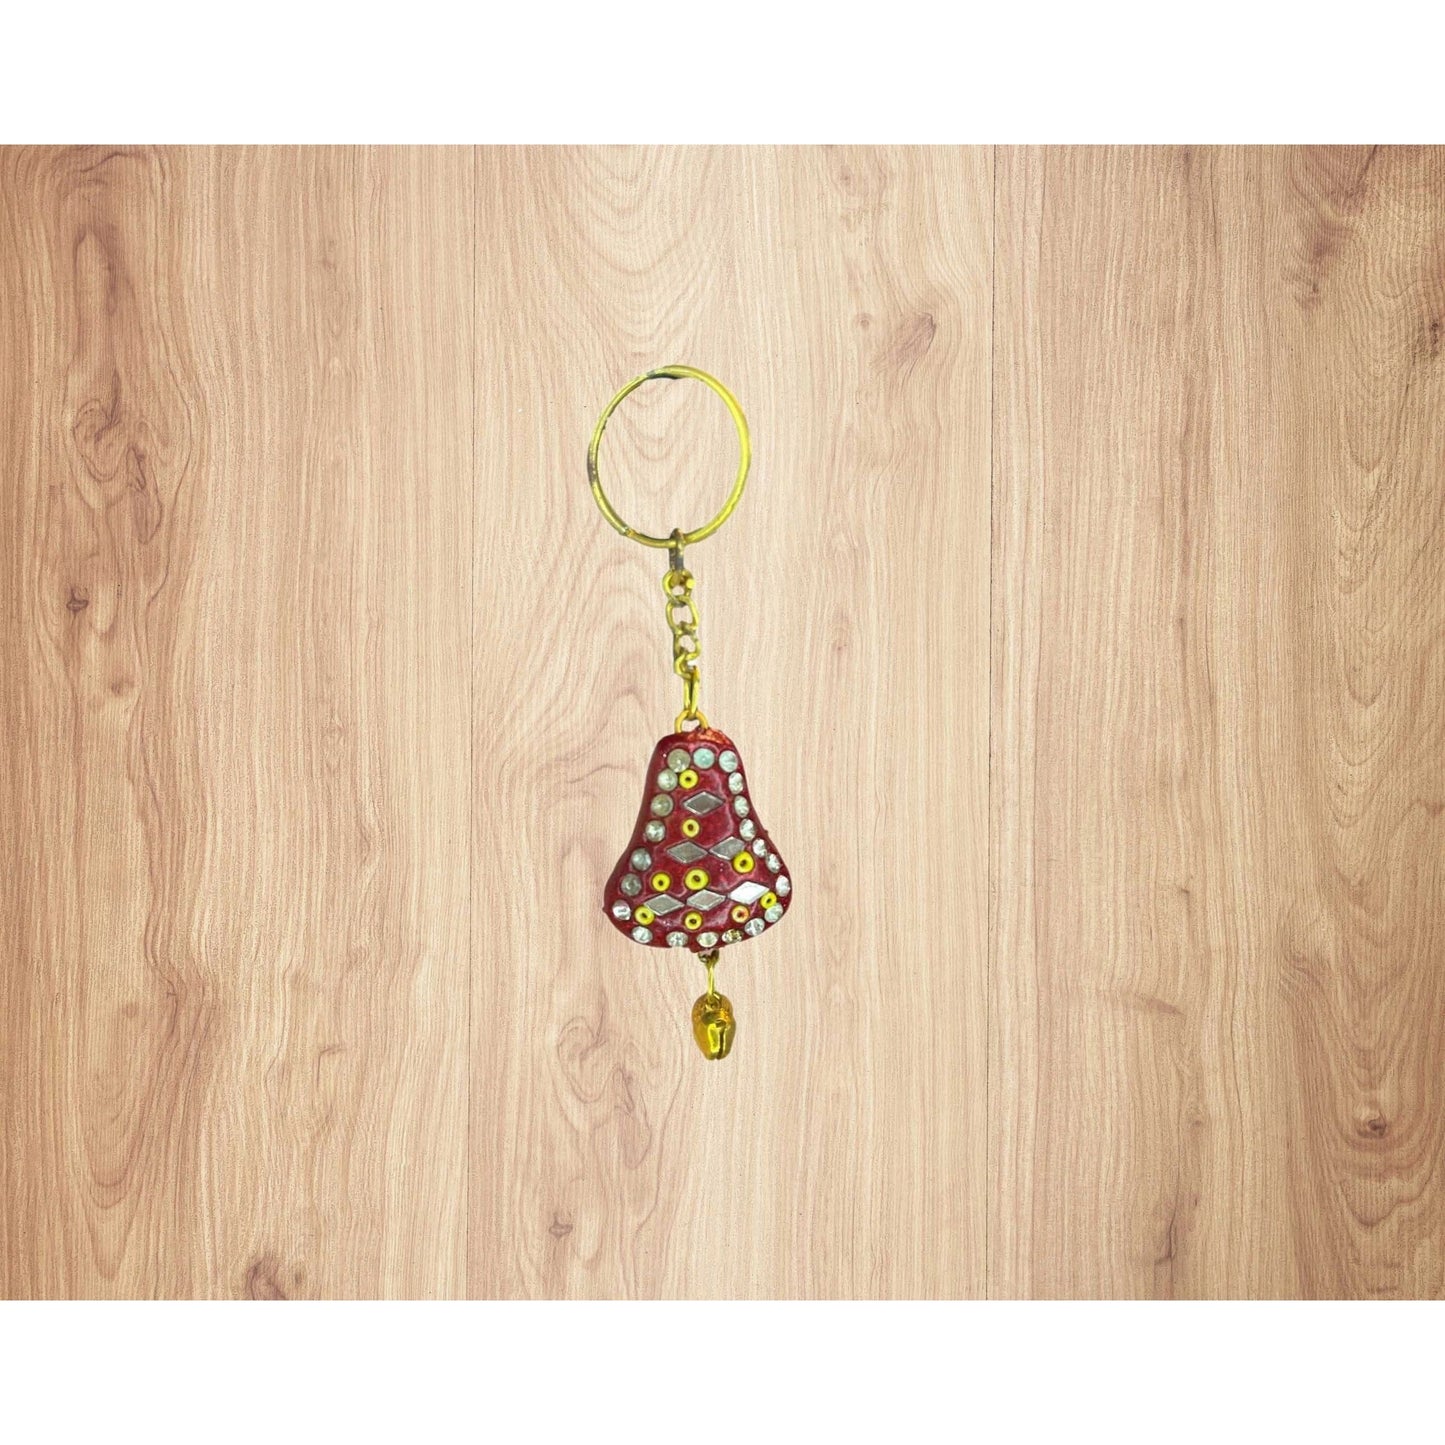 Handmade Rajasthani Bell Shaped Key Chain with Bells